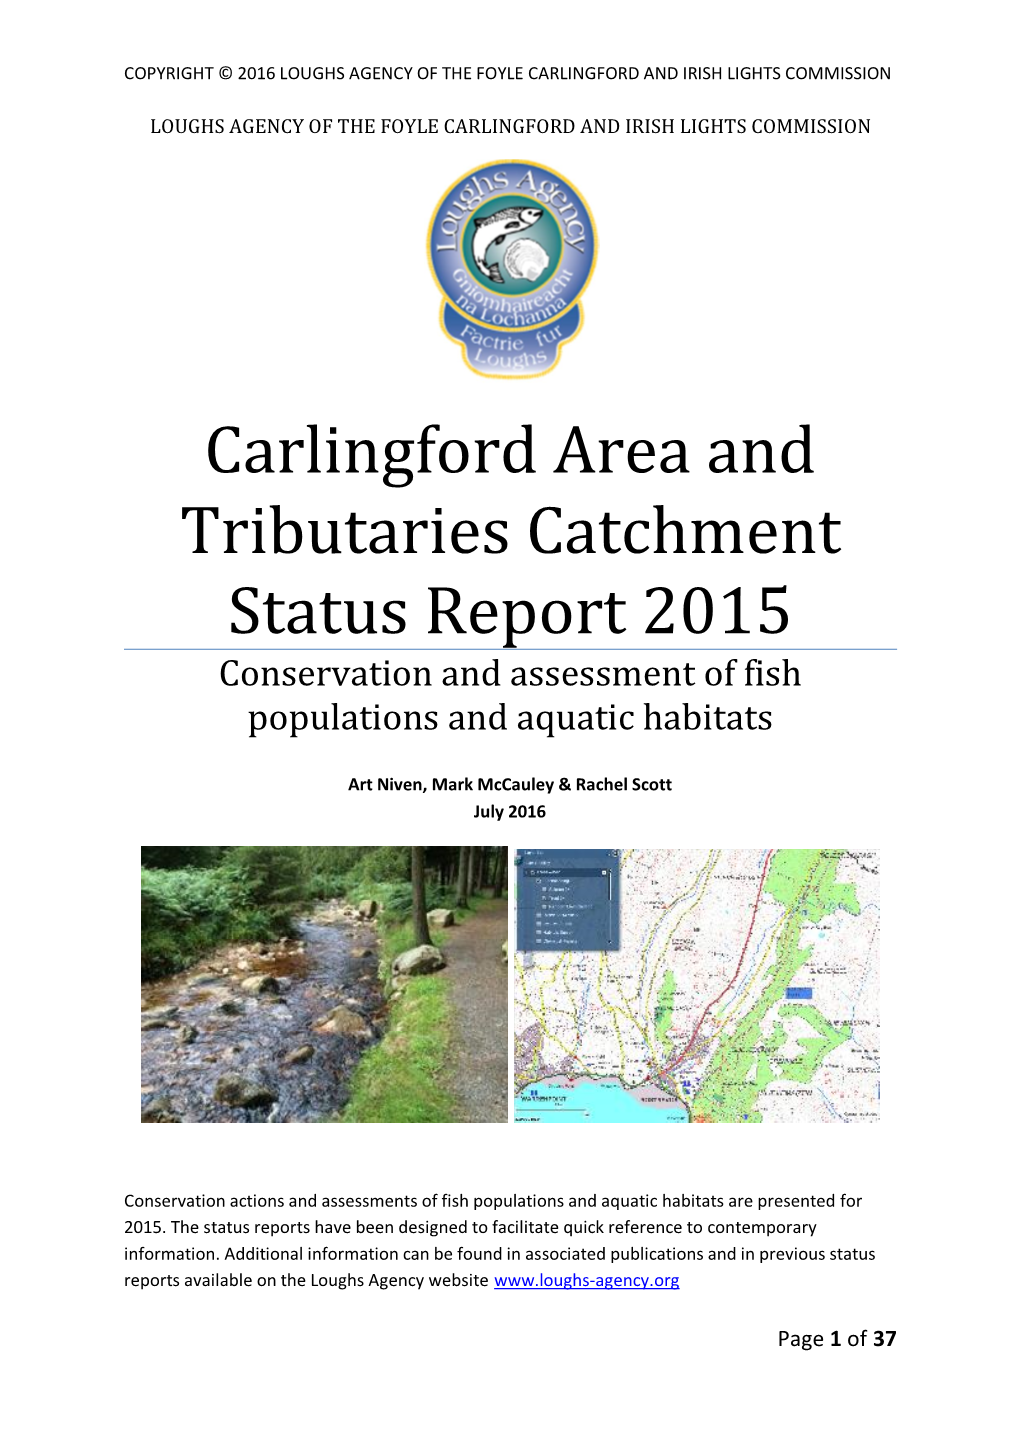 Carlingford Area and Tributaries Catchment Status Report 2015 Conservation and Assessment of Fish Populations and Aquatic Habitats